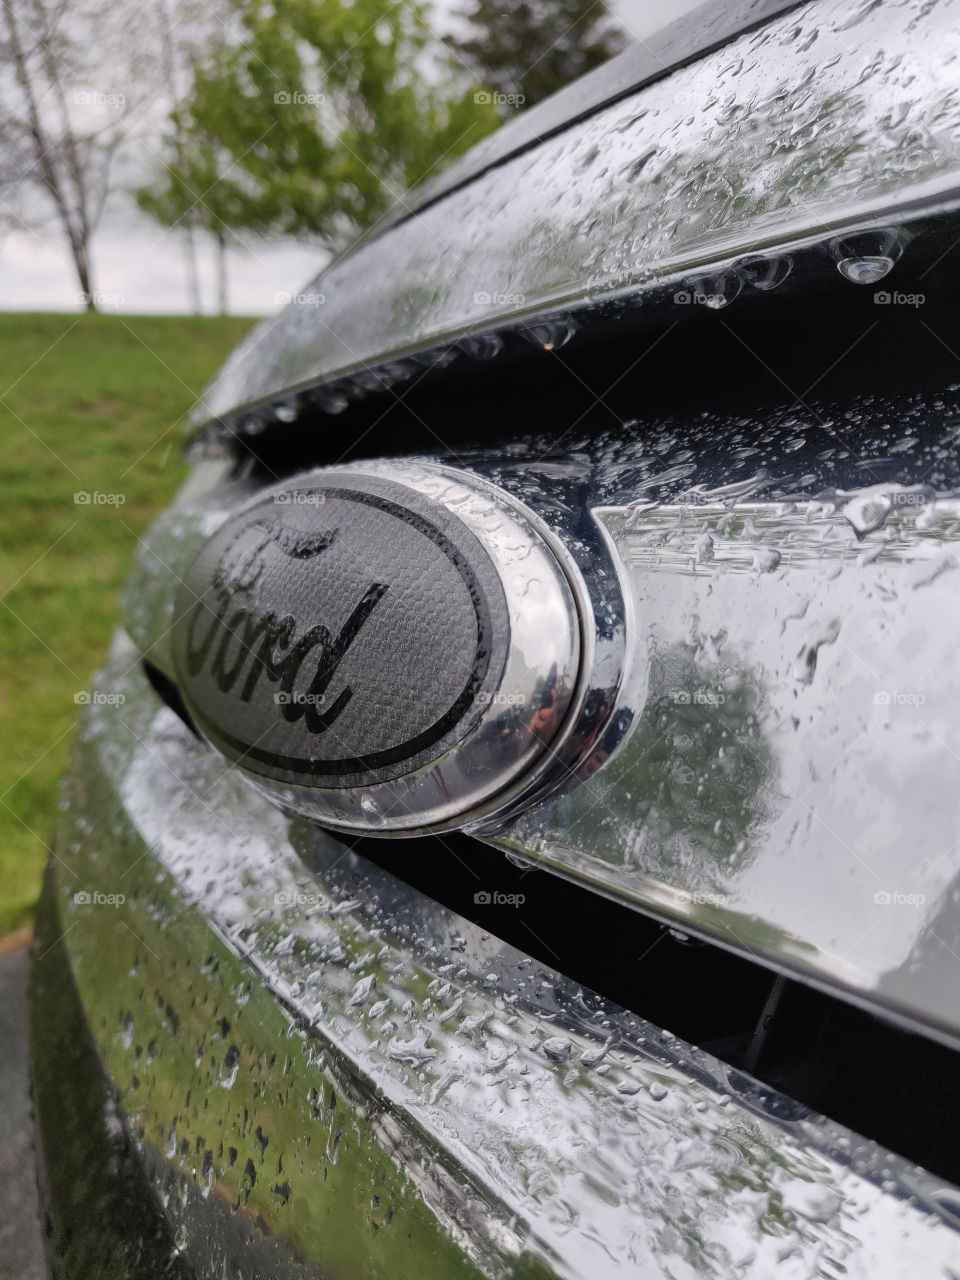 Ford in the rain.